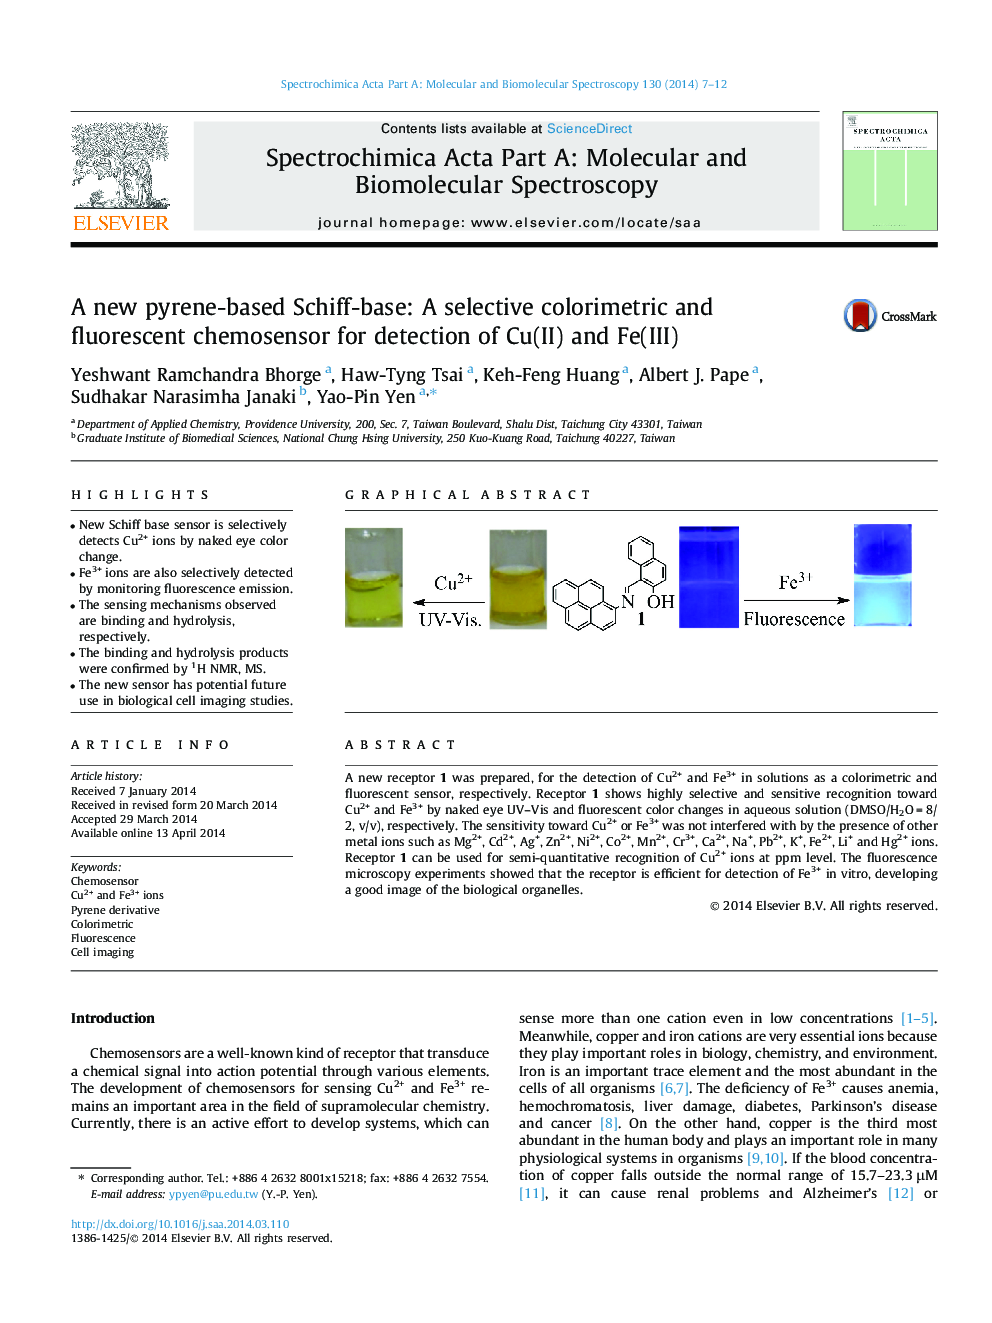 A new pyrene-based Schiff-base: A selective colorimetric and fluorescent chemosensor for detection of Cu(II) and Fe(III)